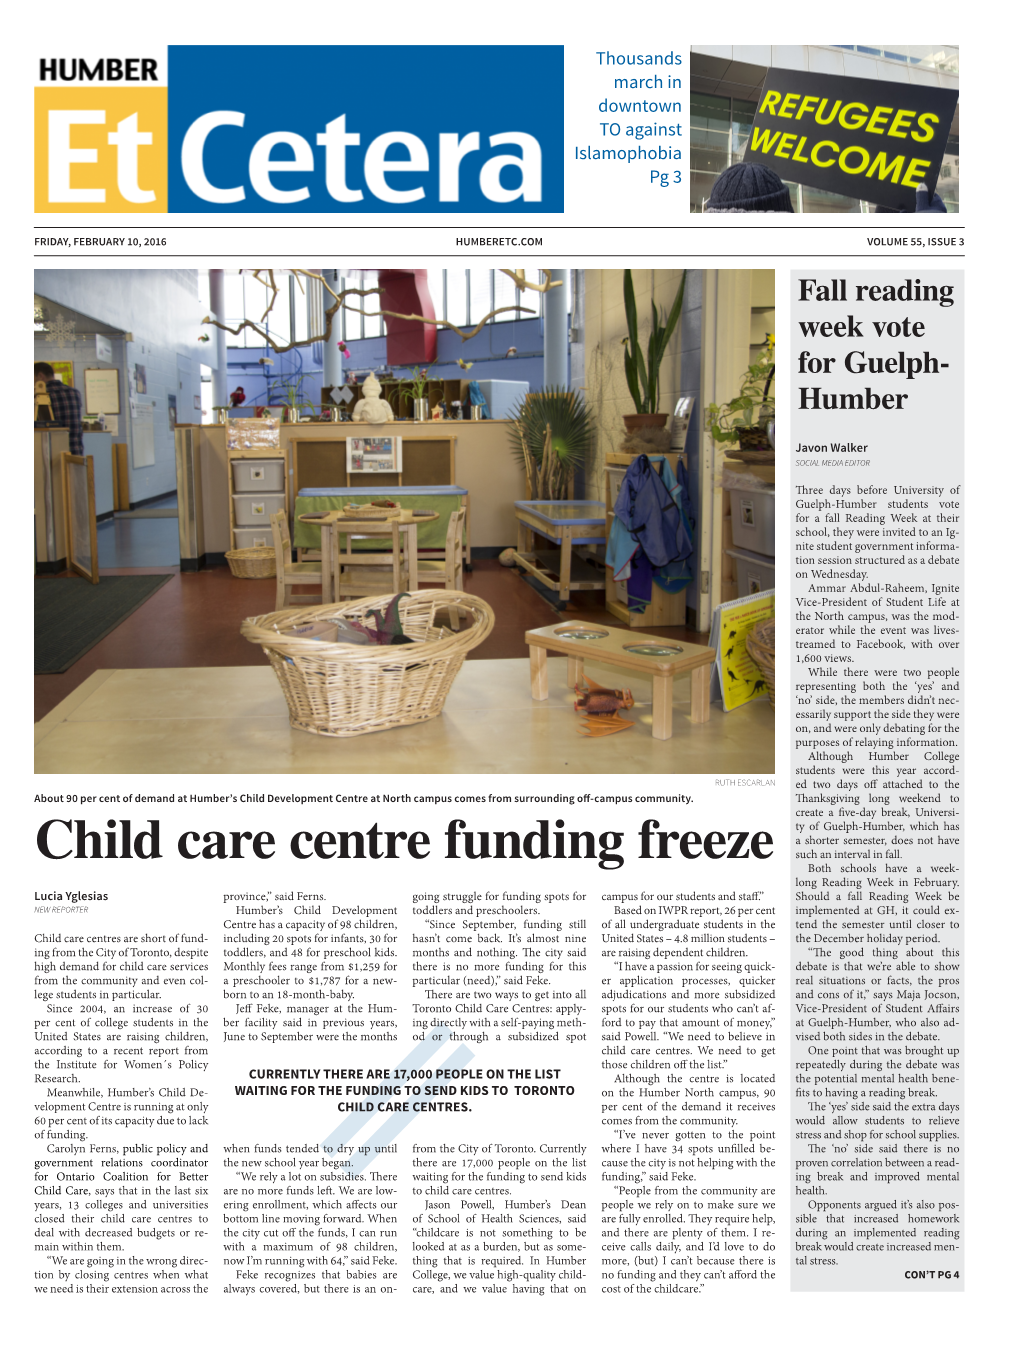 Child Care Centre Funding Freeze Both Schools Have a Week- Long Reading Week in February